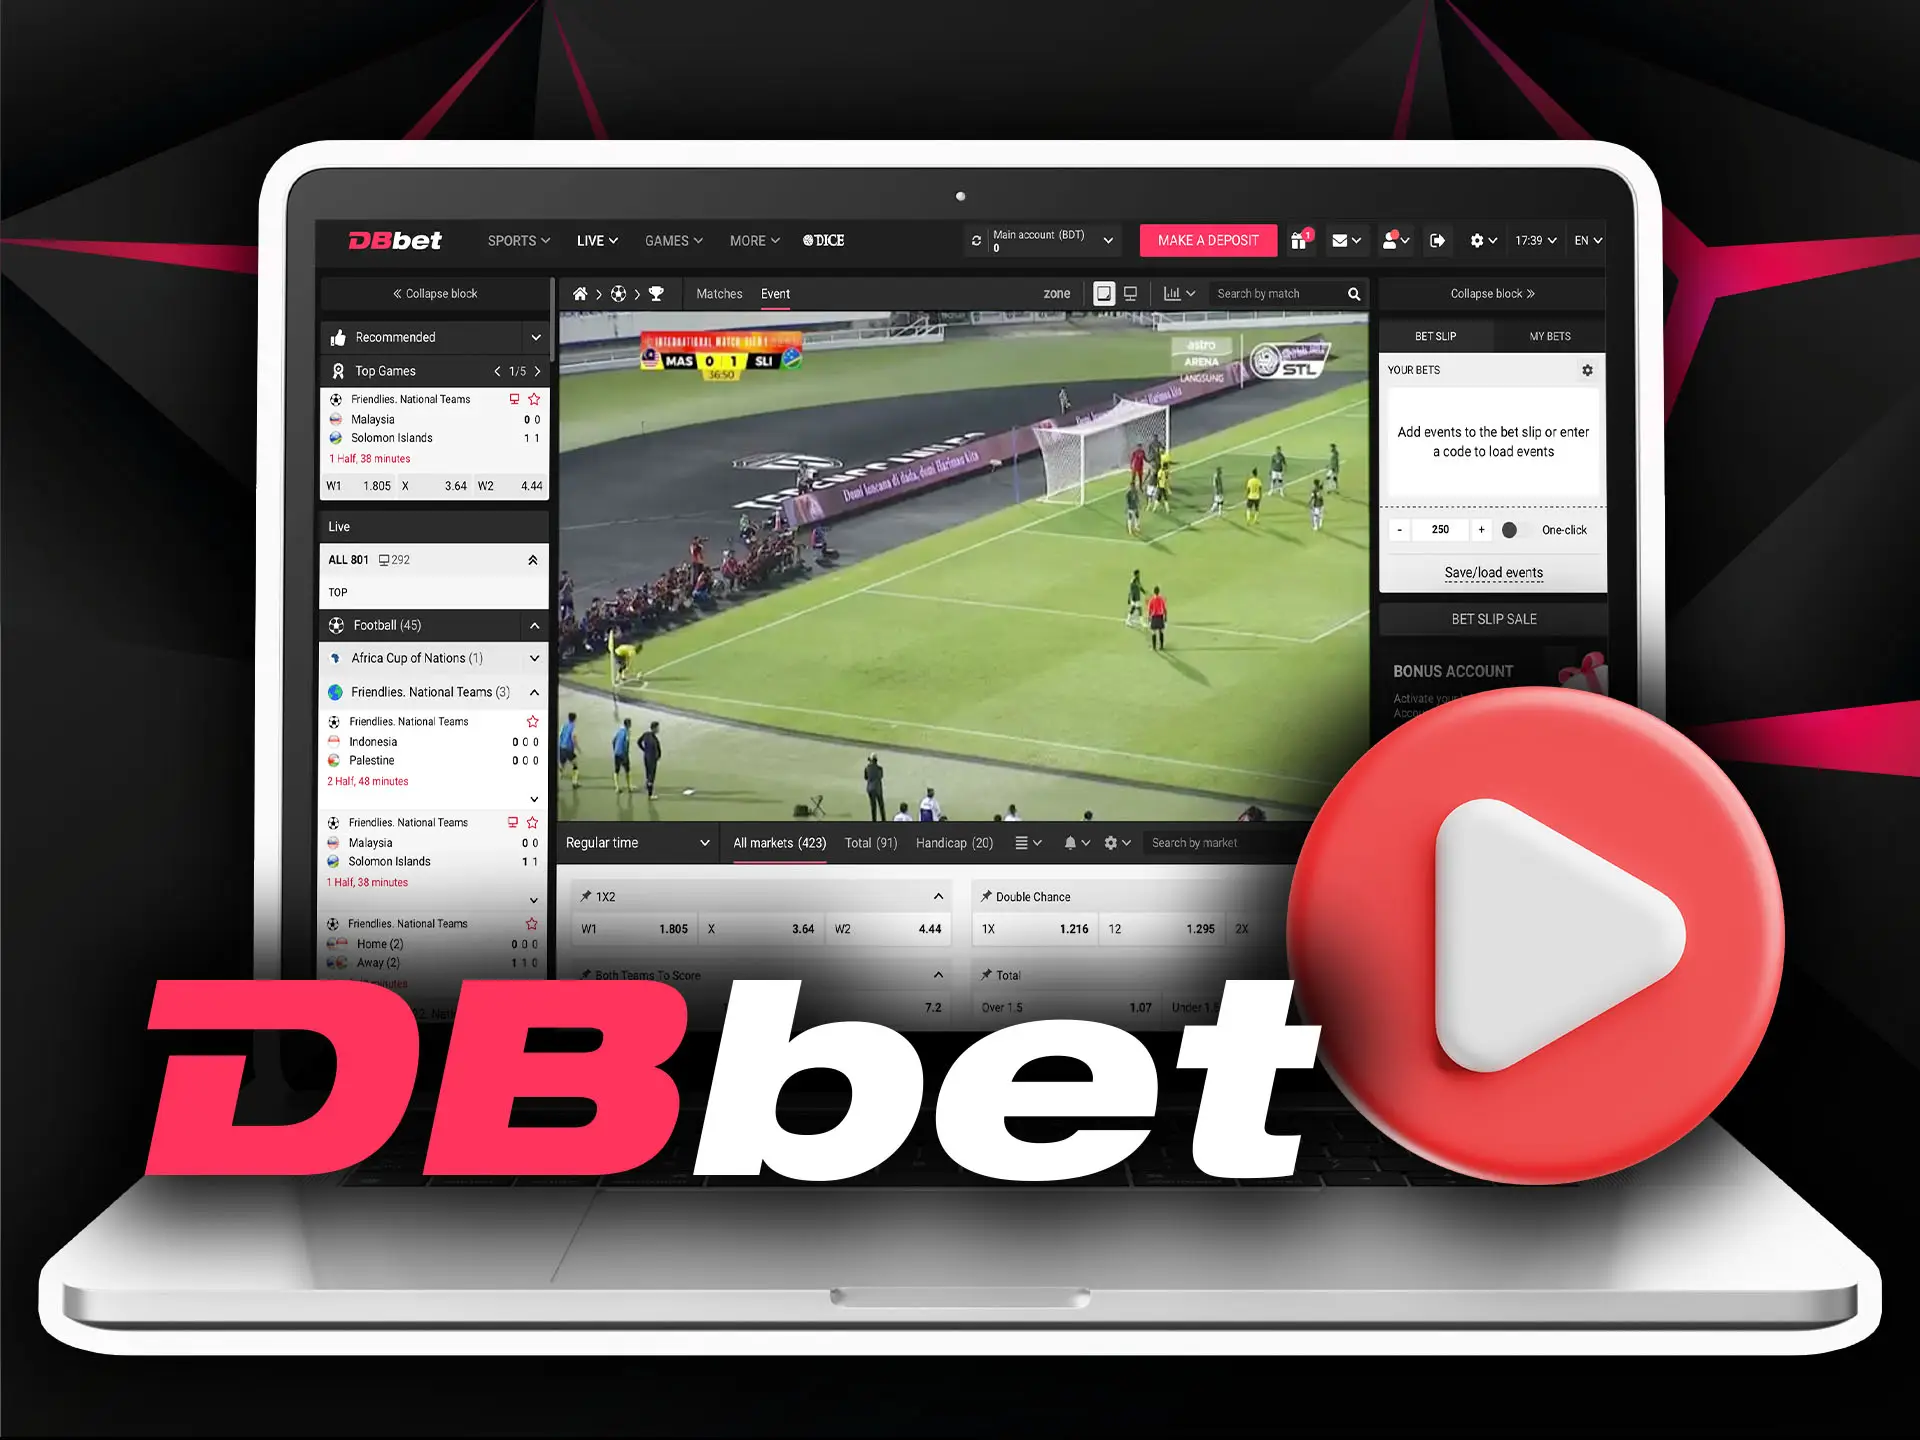 Watch all the matches on the DBbet website.